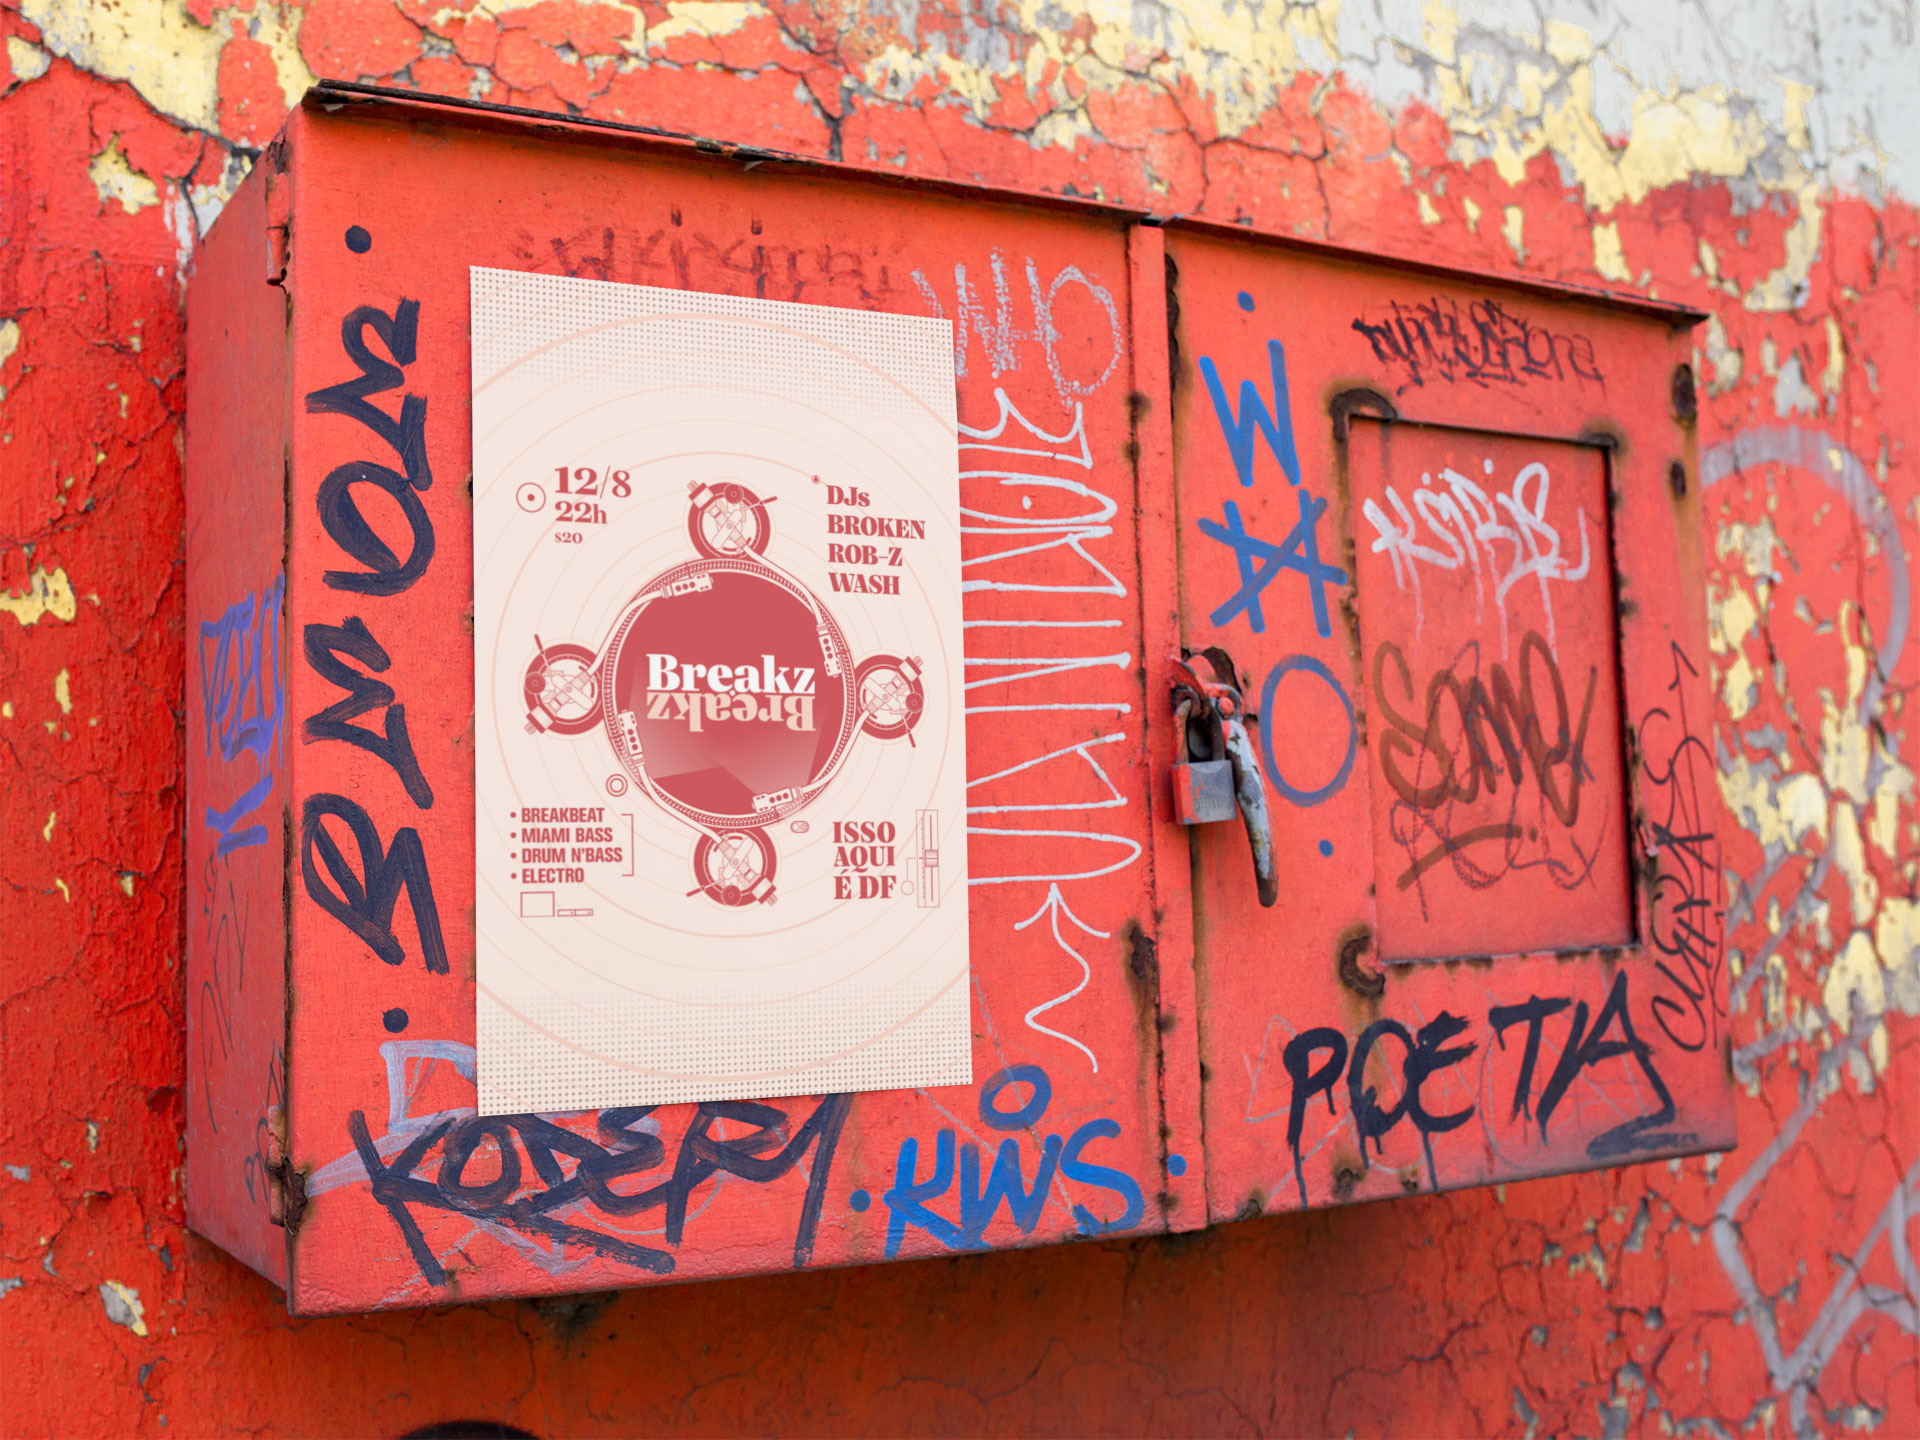 mockup-of-a-poster-placed-on-a-graffiti-metal-box-a14409